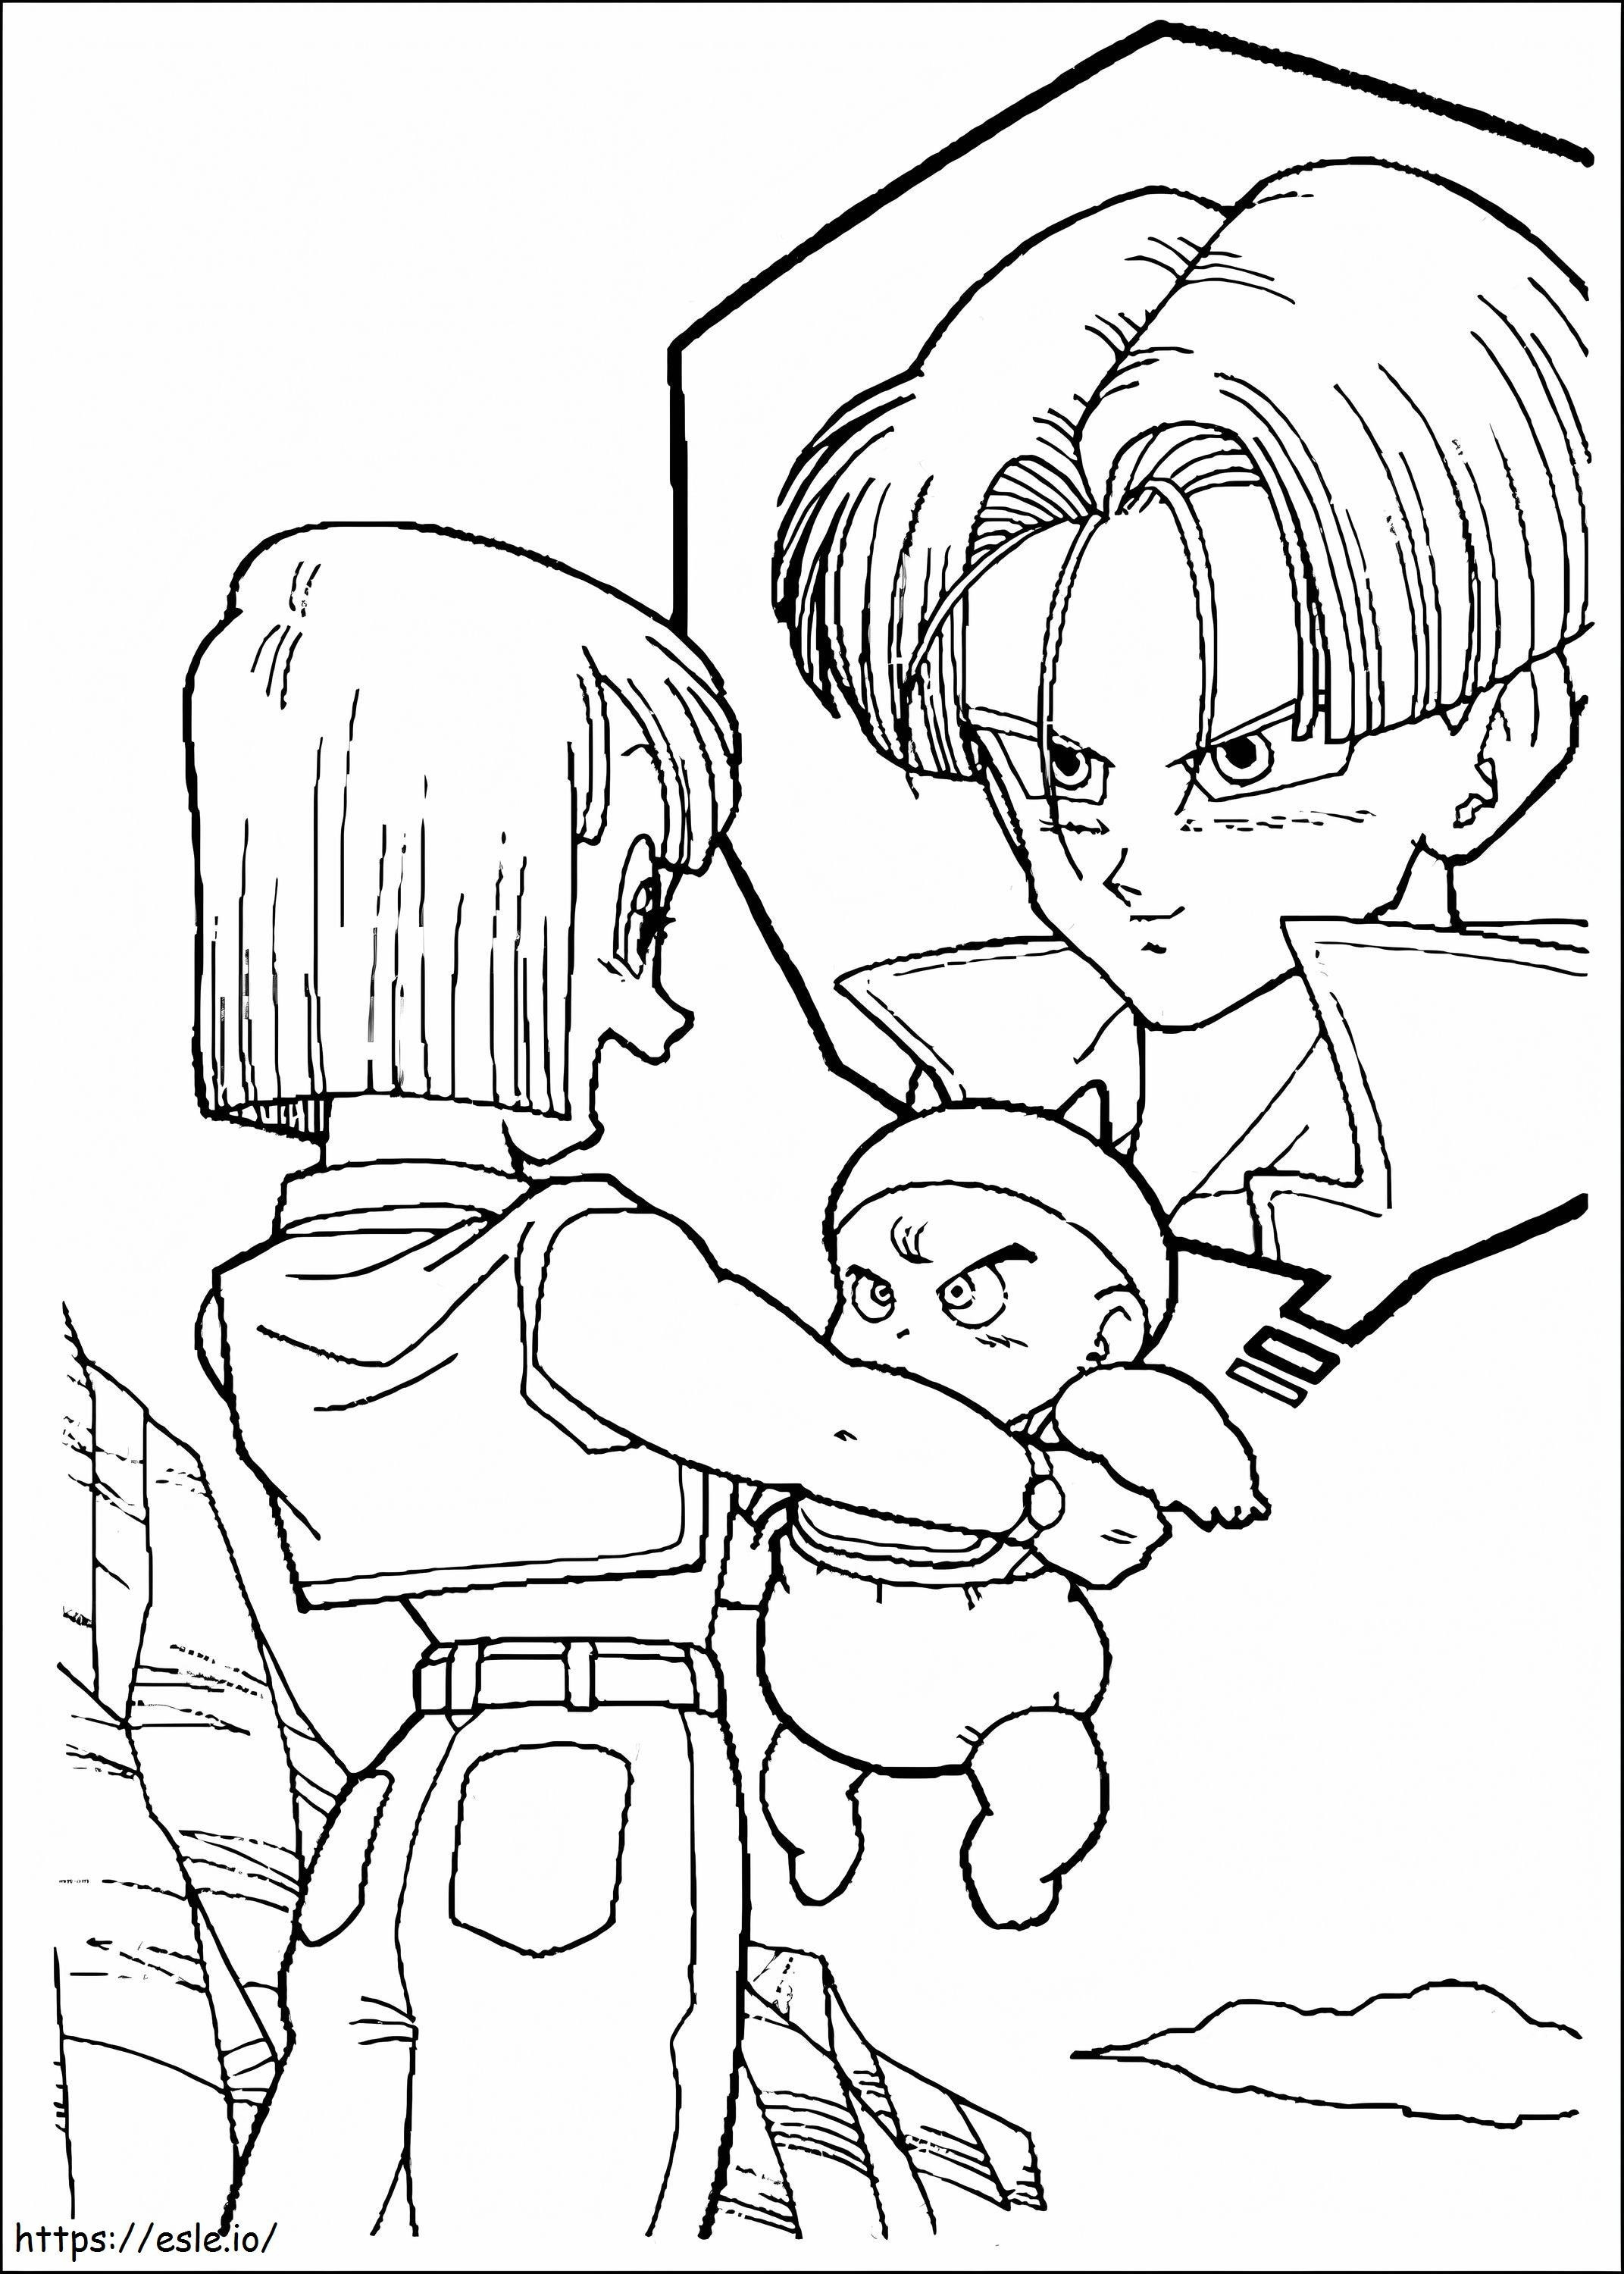 Bulma Y Trunks coloring page